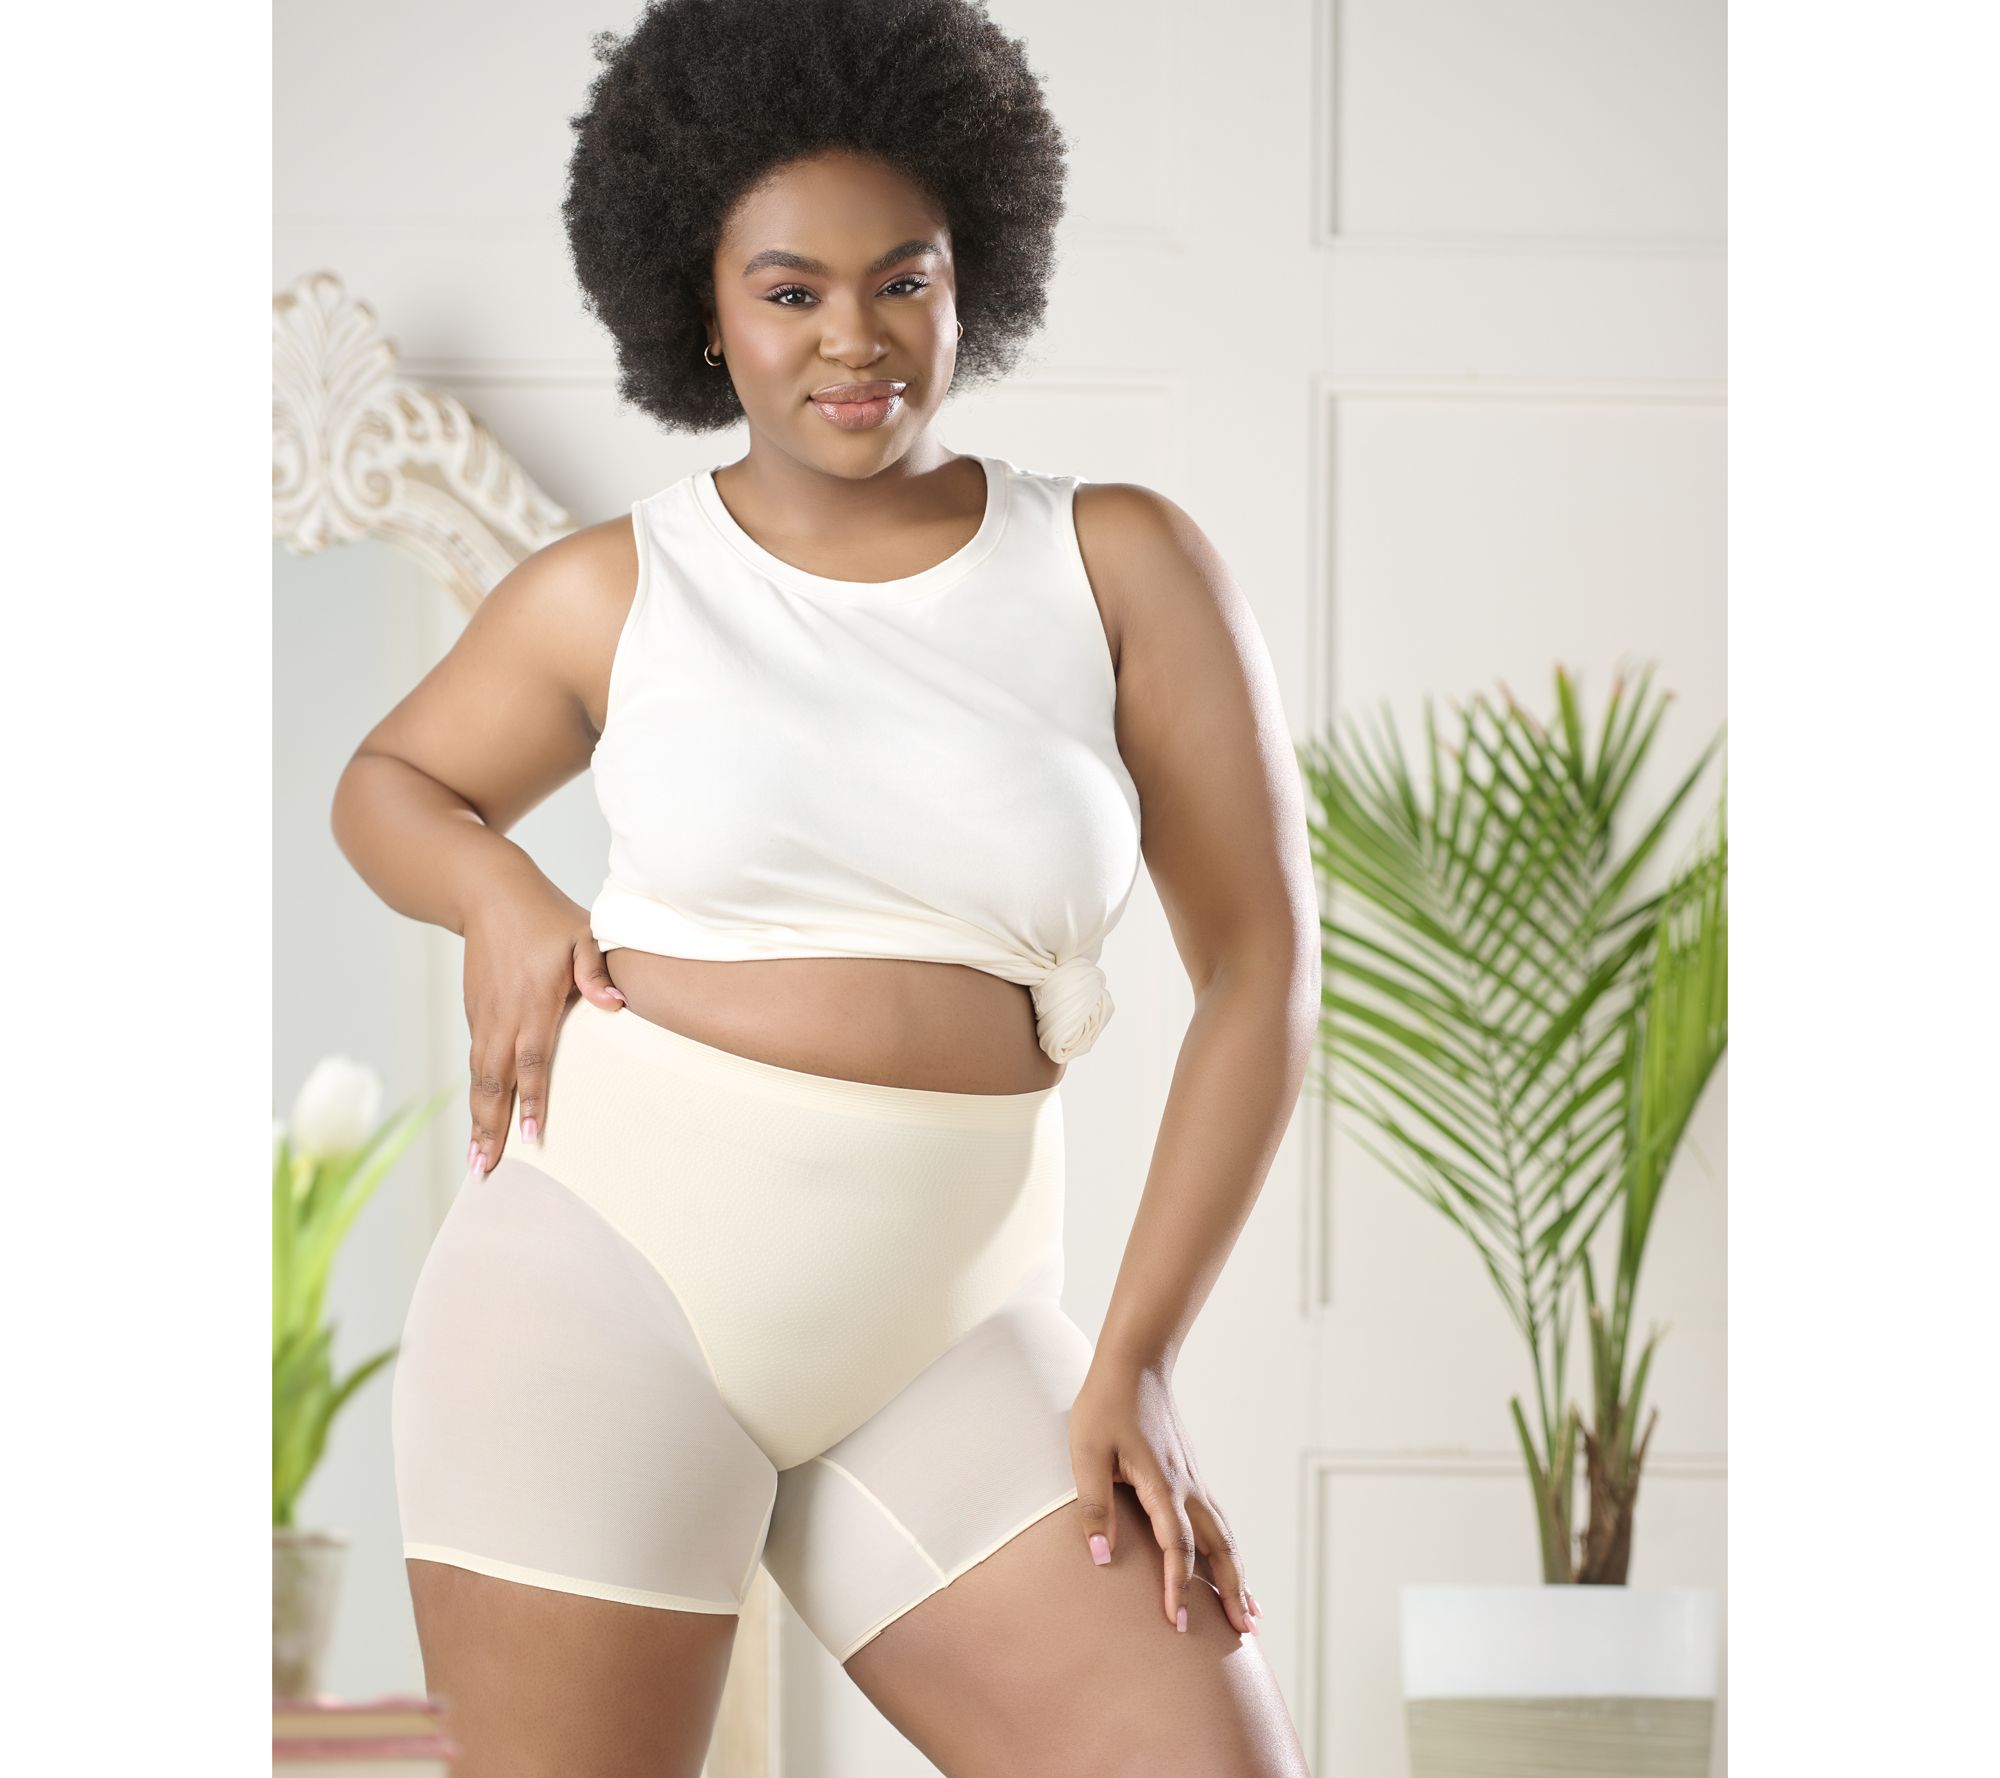 NEW ARRIVAL: Shapermint Essentials Everyday Empower Mesh Shaper